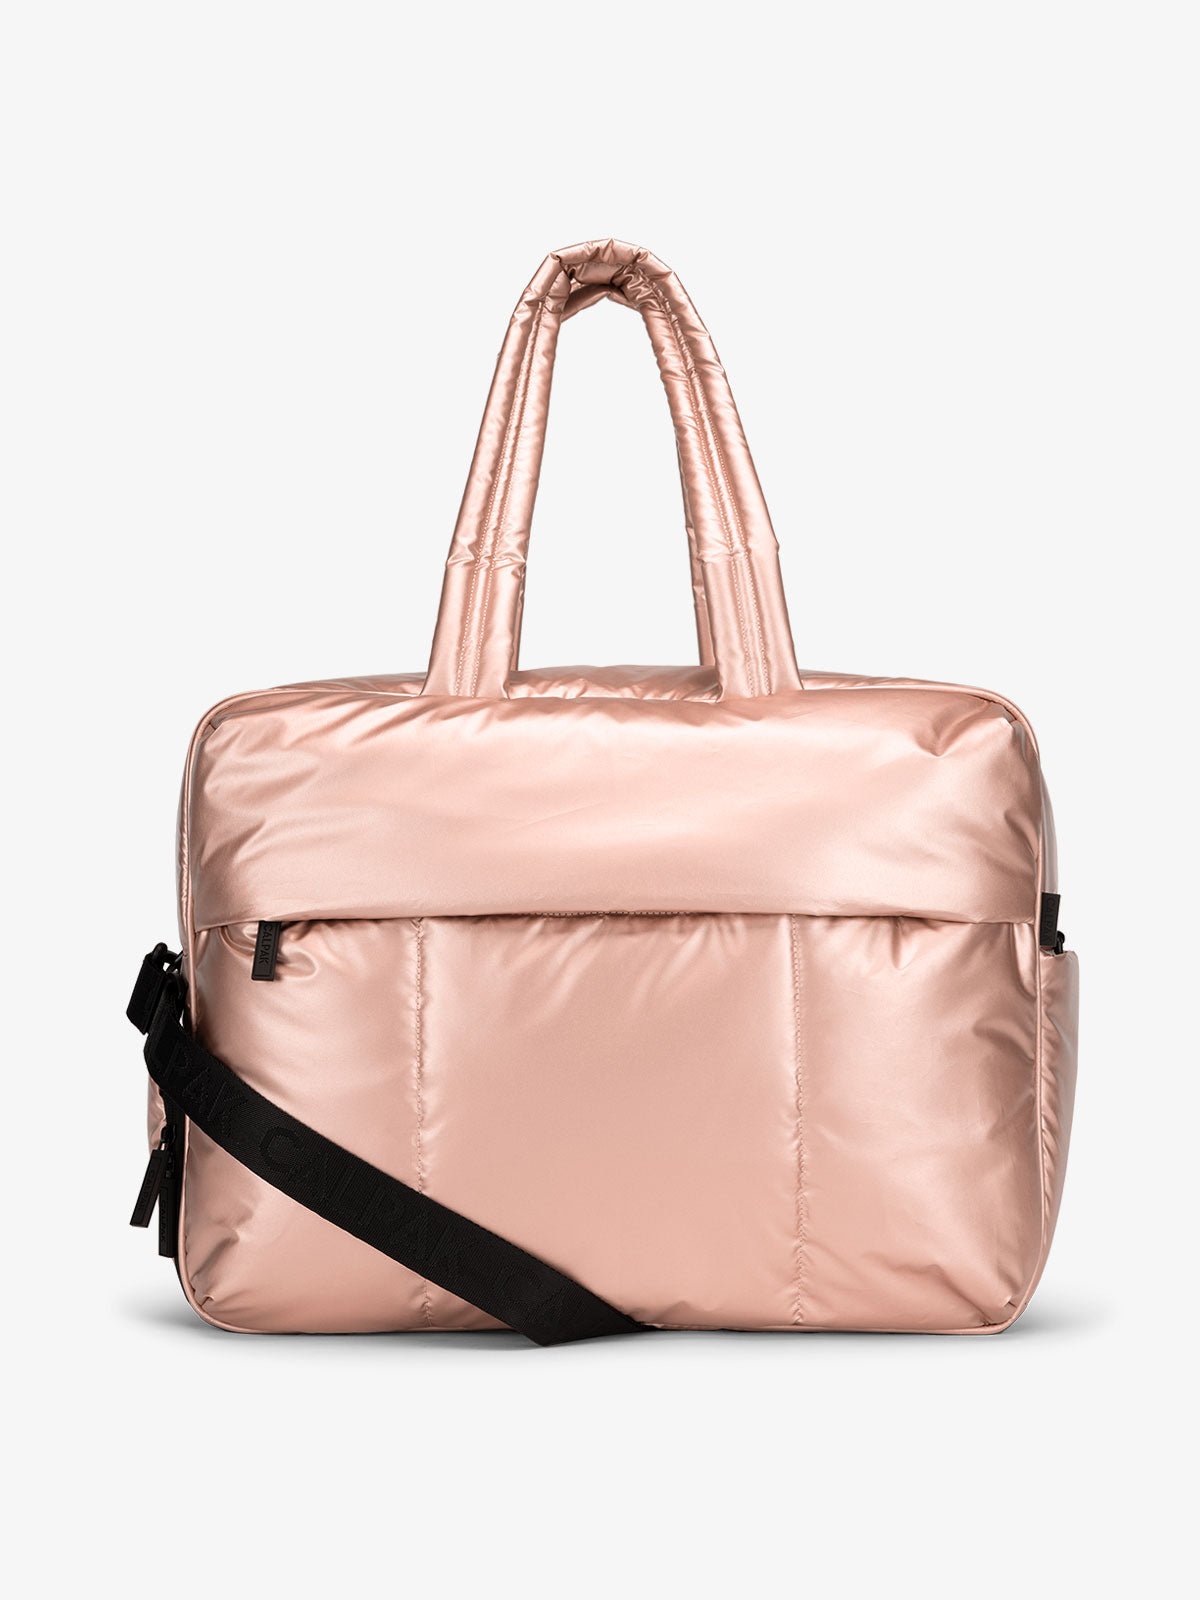 CALPAK Luka large duffle bag with detachable strap and zippered front pocket in metallic pink